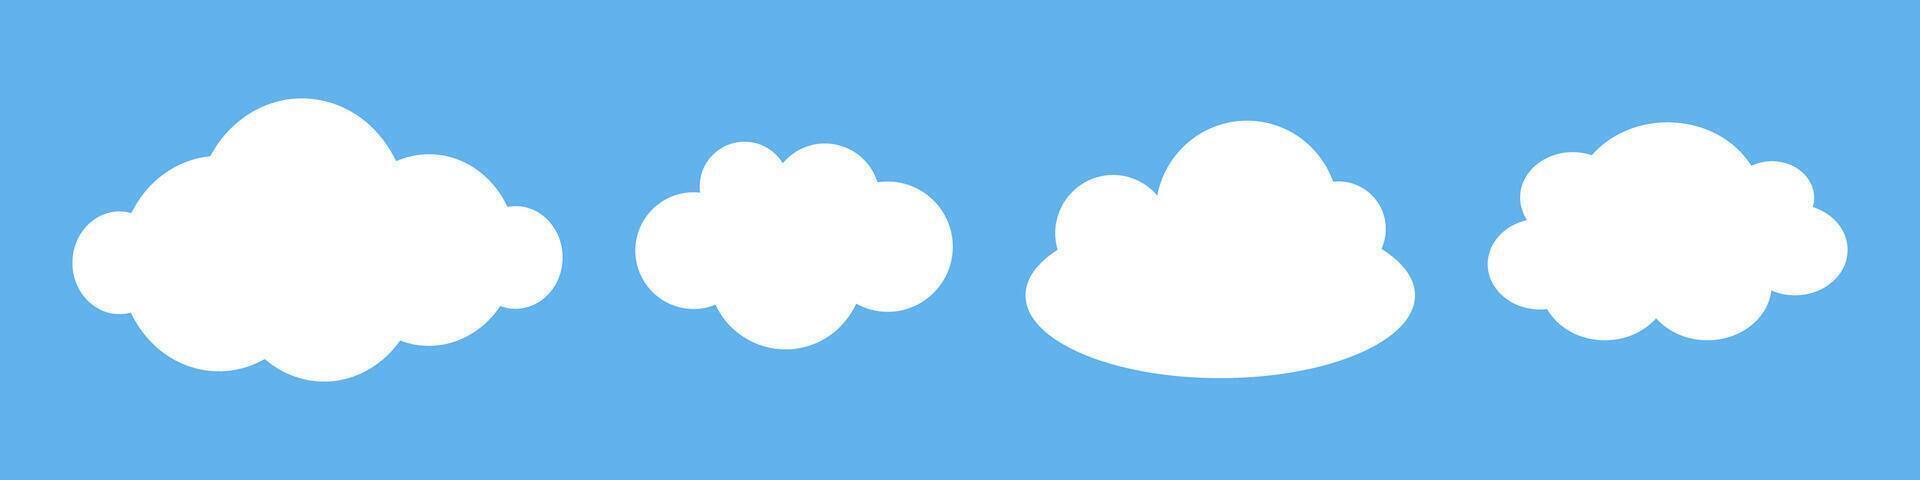 set of childish white clouds on blue background. Baby kids cloud collection in flat design. vector